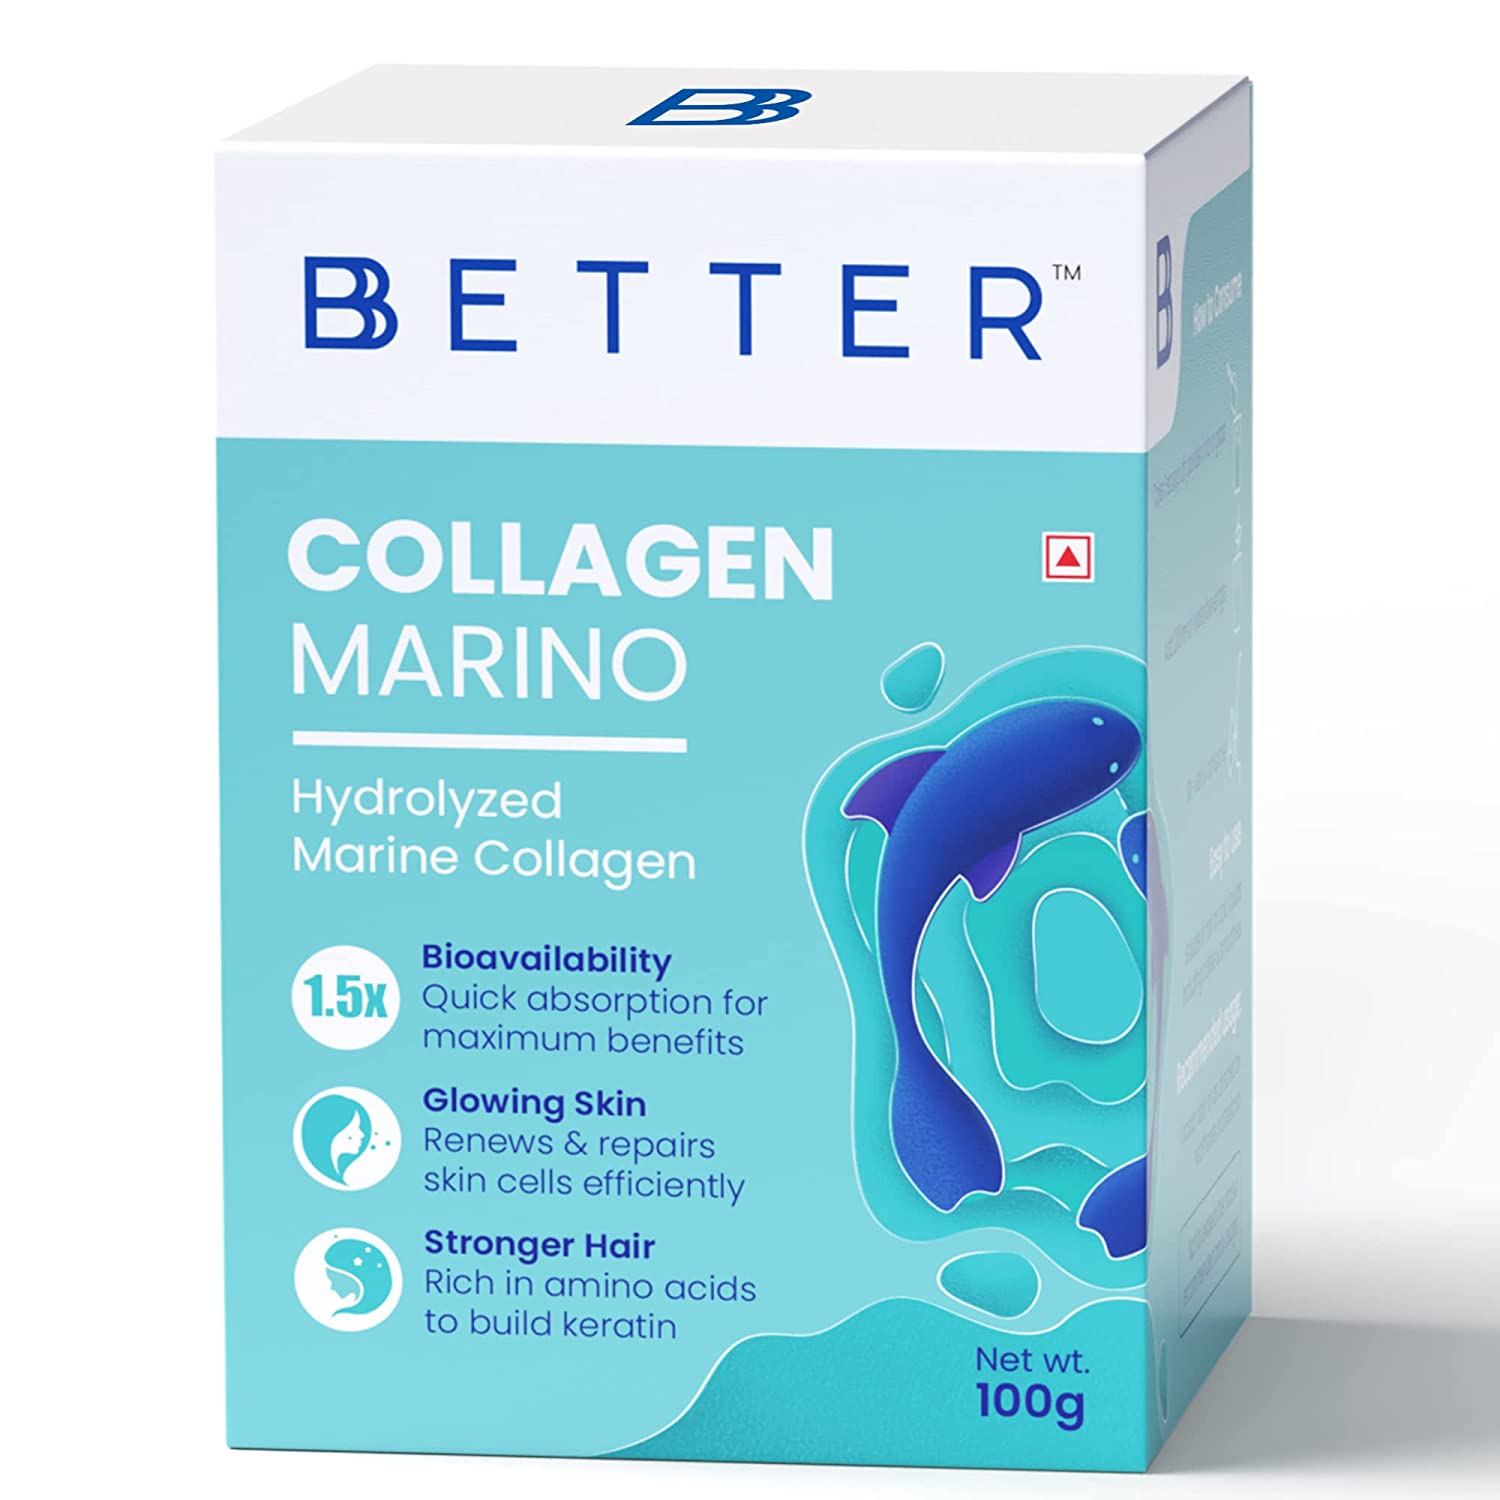 Combo Pack Of Collagen Marino and Omega 3 Fish Oil Benefits